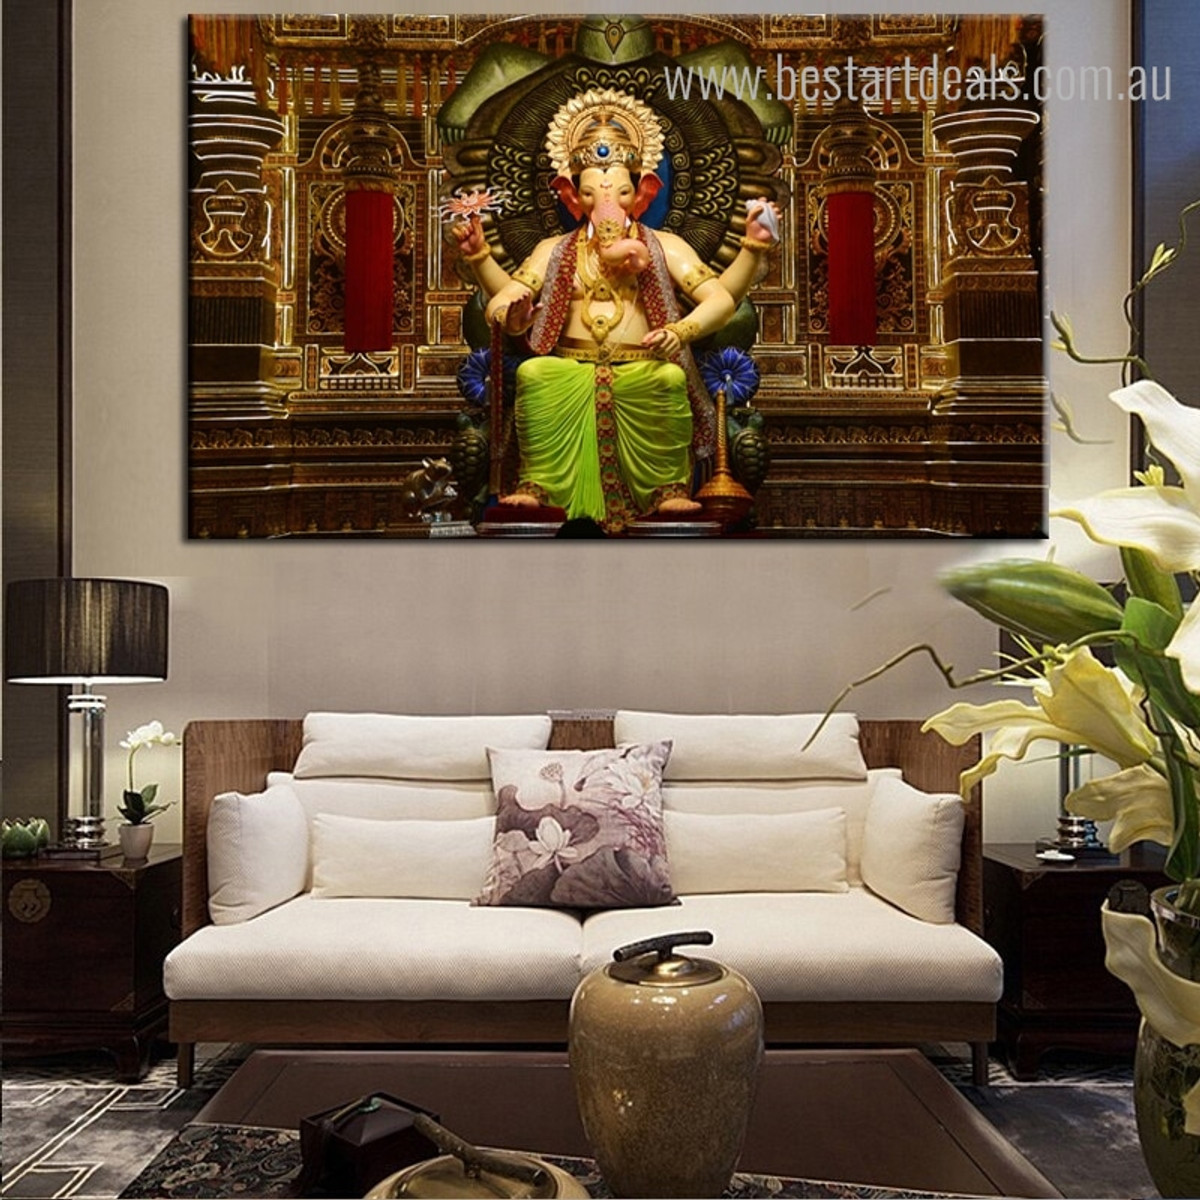 Godhead Ganesh Religious Modern Framed Portmanteau Picture Canvas Print for Living Room Wall Decoration